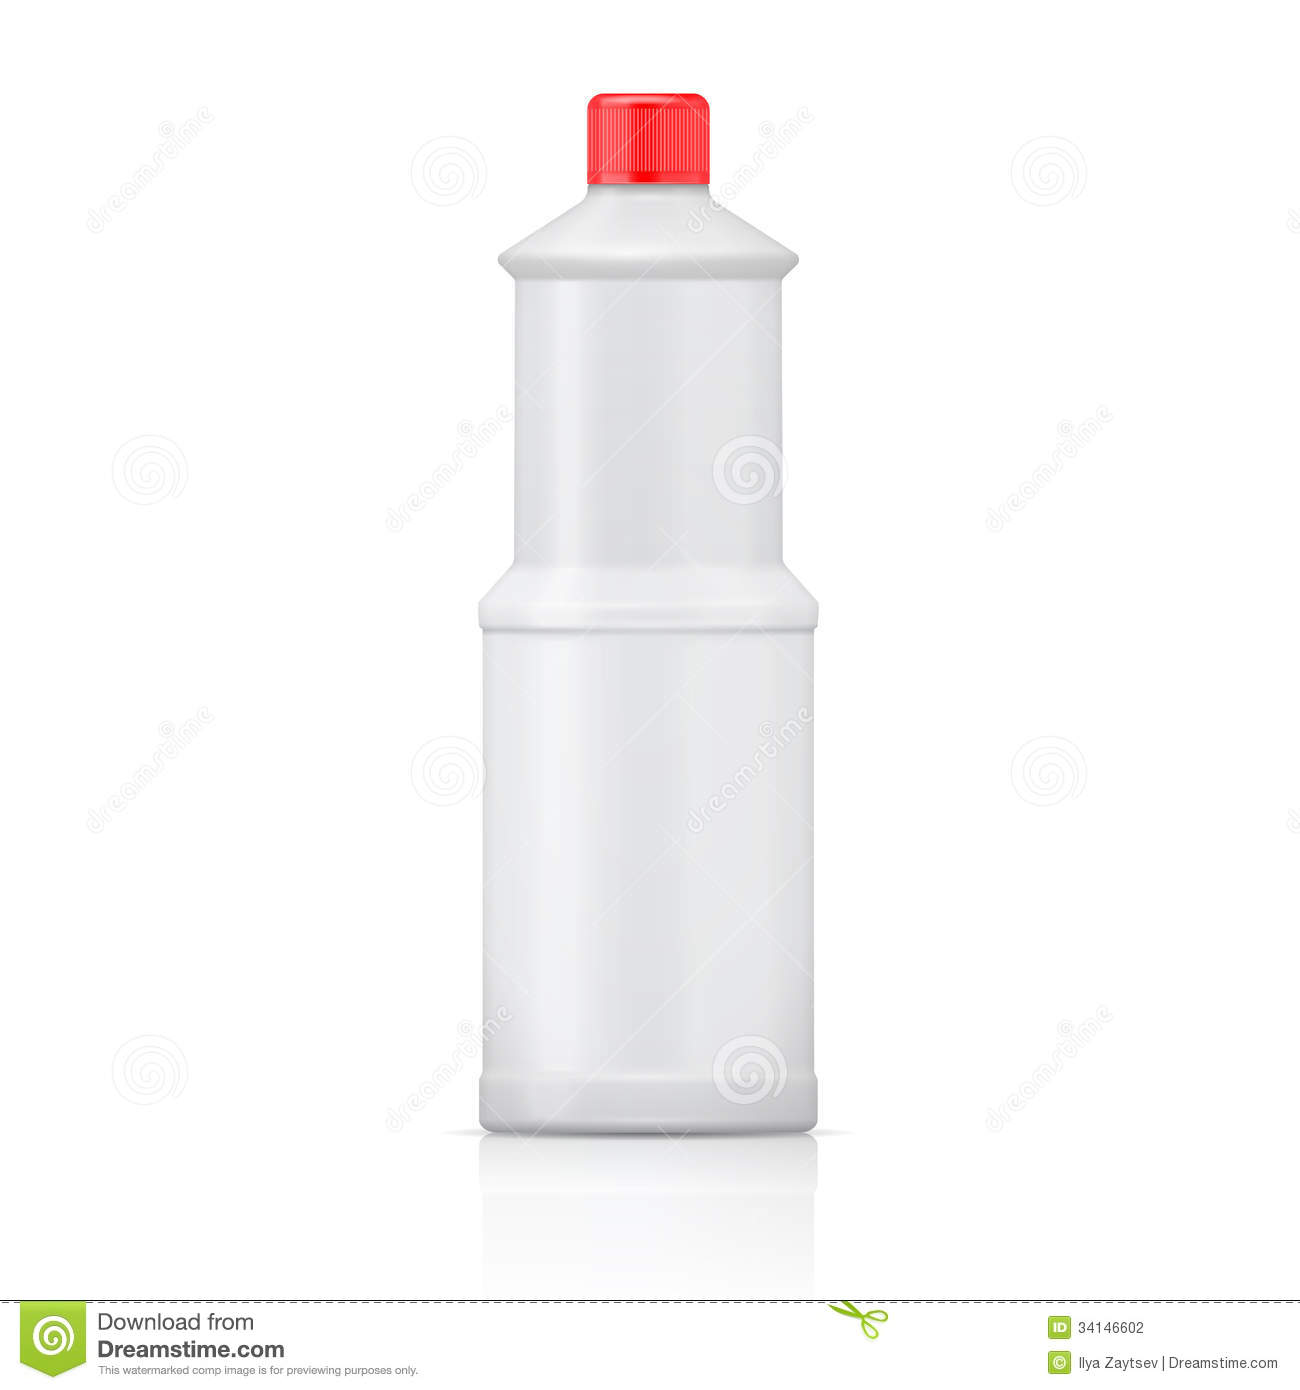 White Plastic Bottle For Bleach Cleaning Agent Or Washing Cleaner